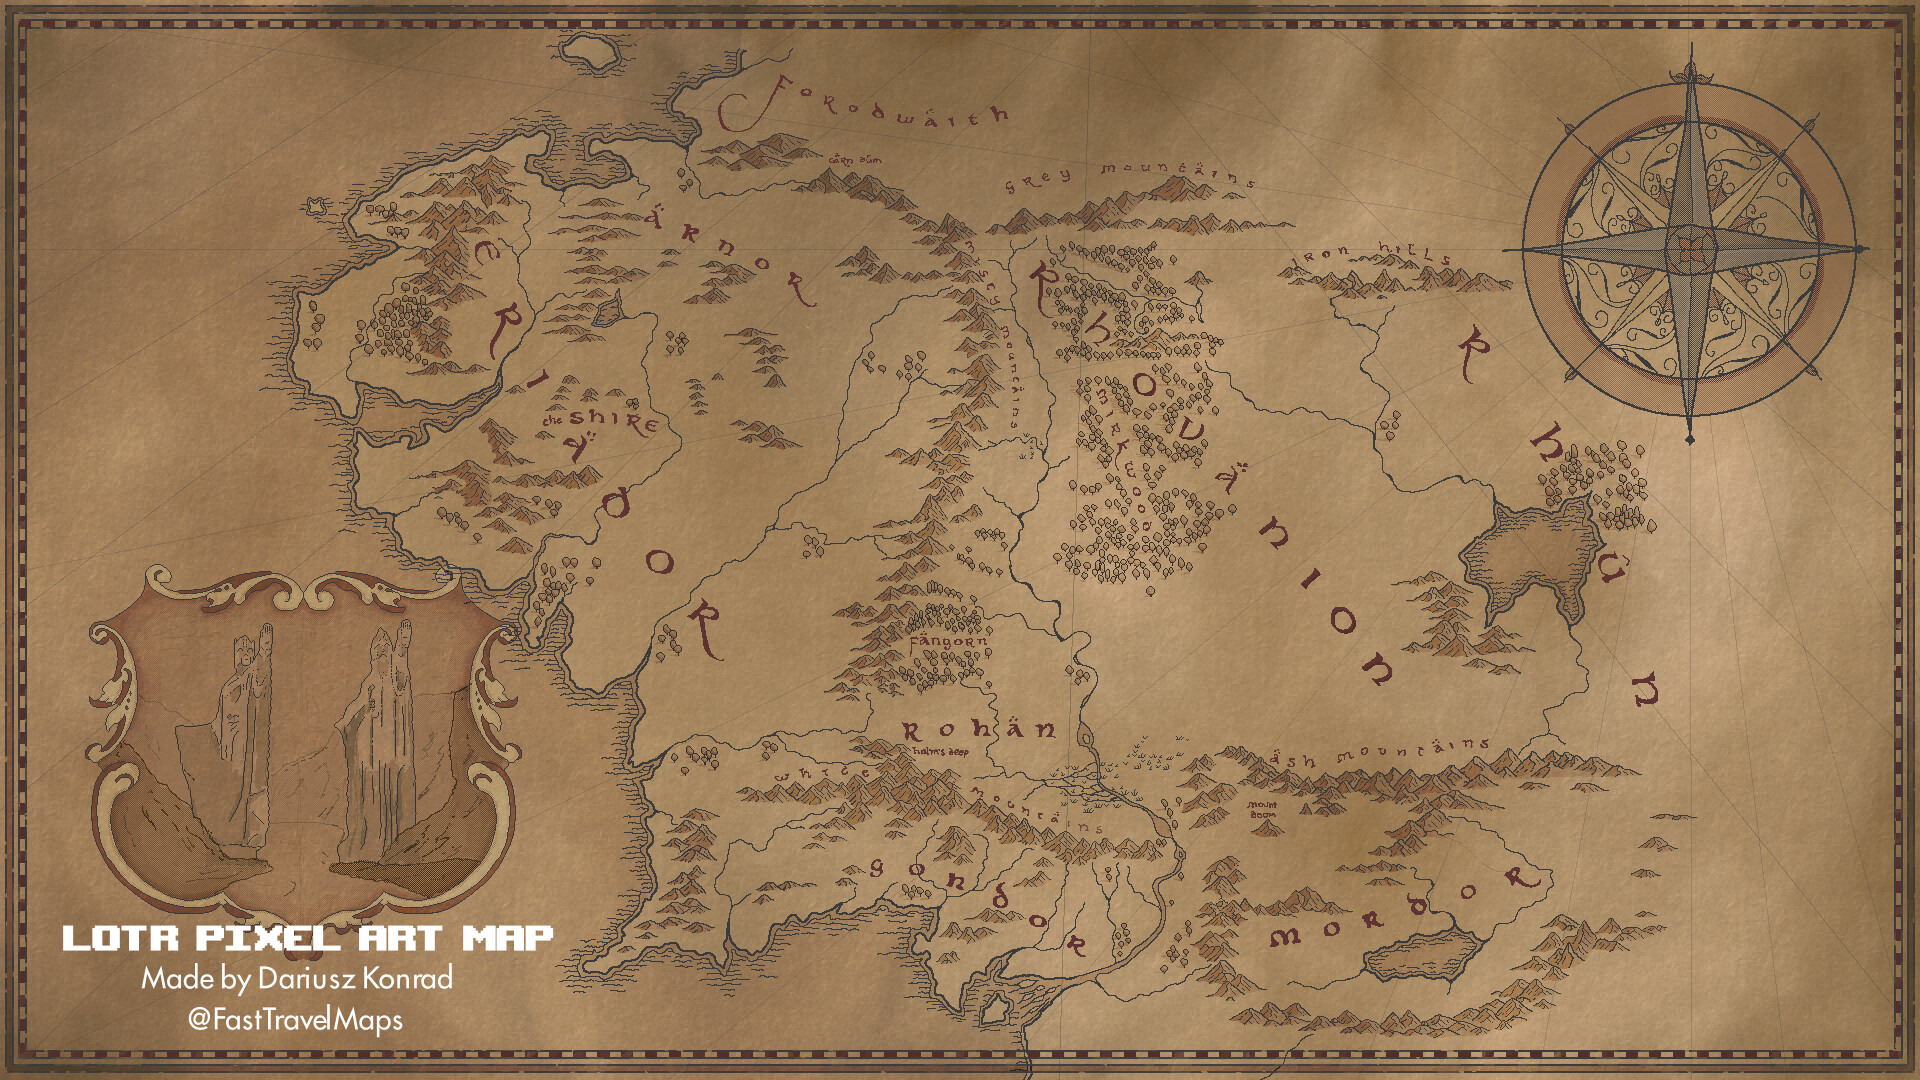 Lord of the Rings Middle Earth Mural Map on Canvas | Flickr